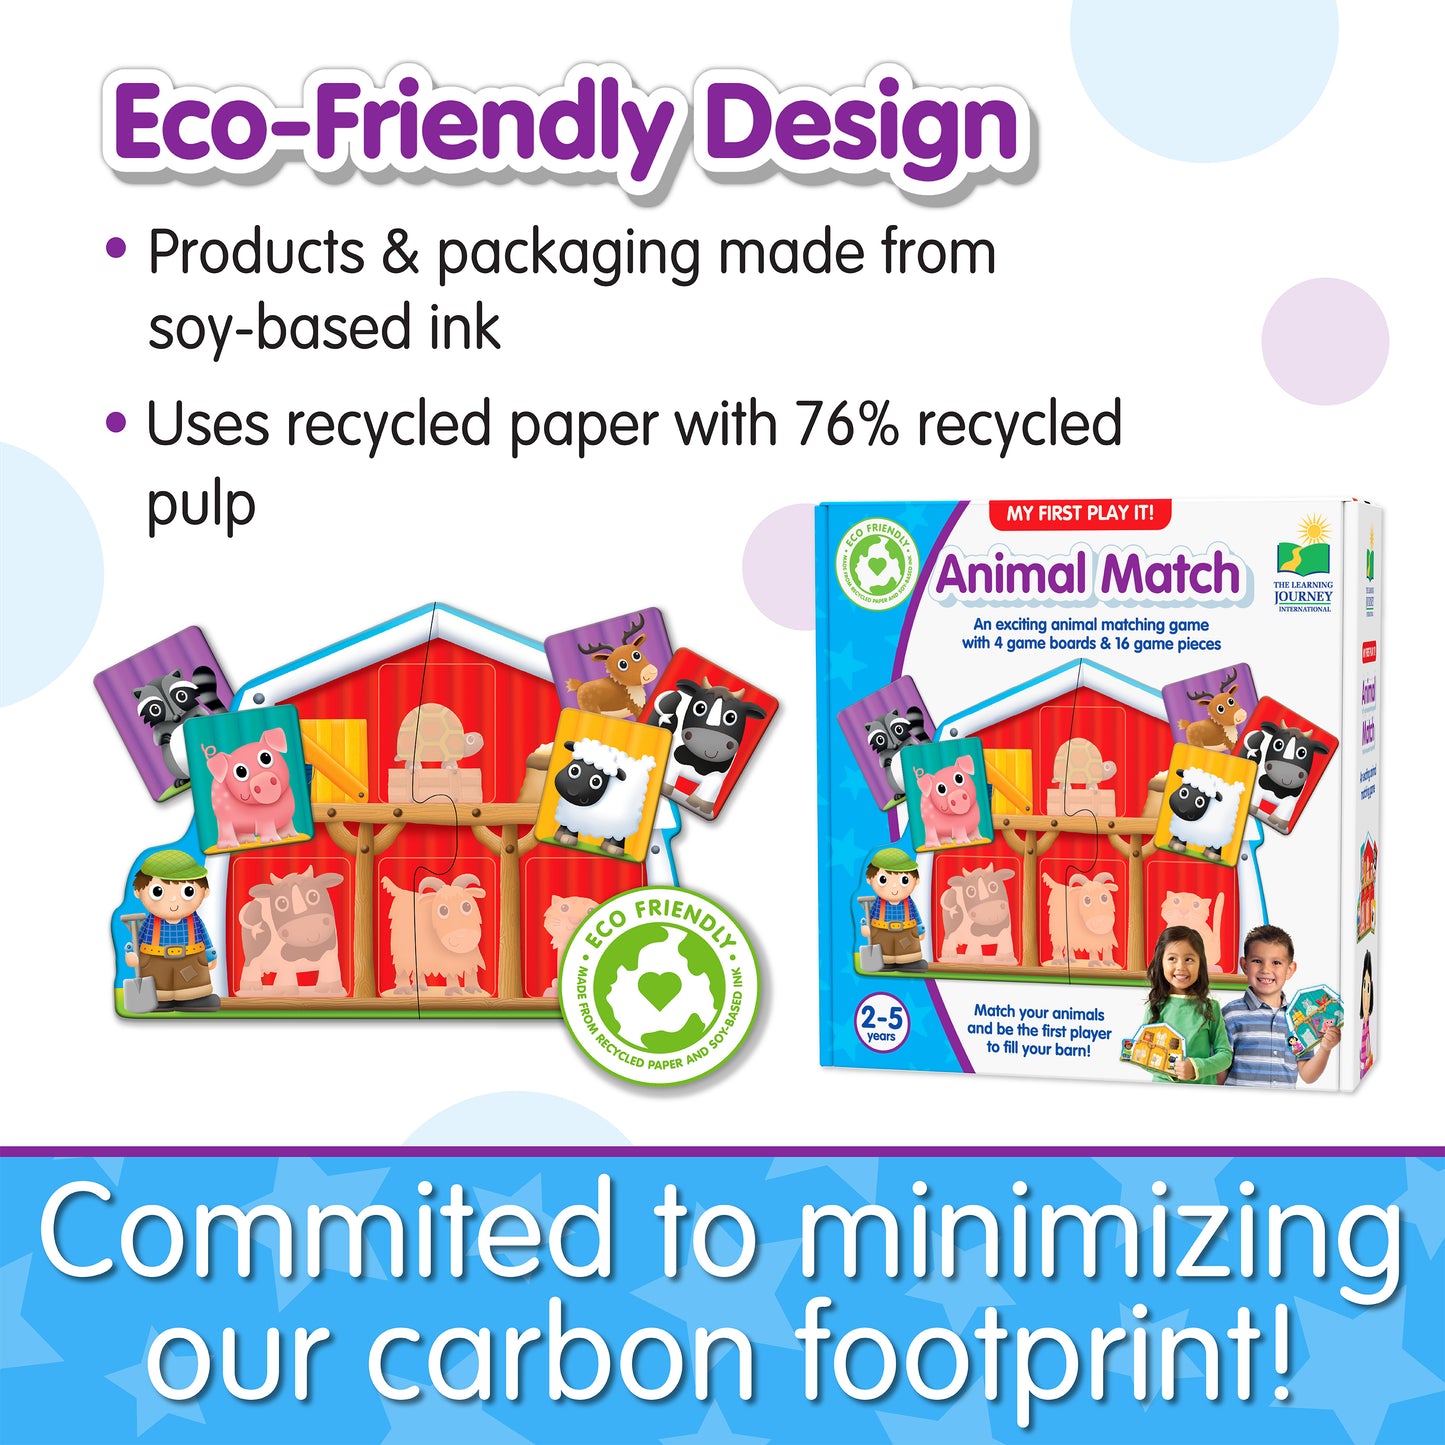 Infographic about My First Play It - Animal Match's eco-friendly design that says, "Committed to minimizing our carbon footprint!"